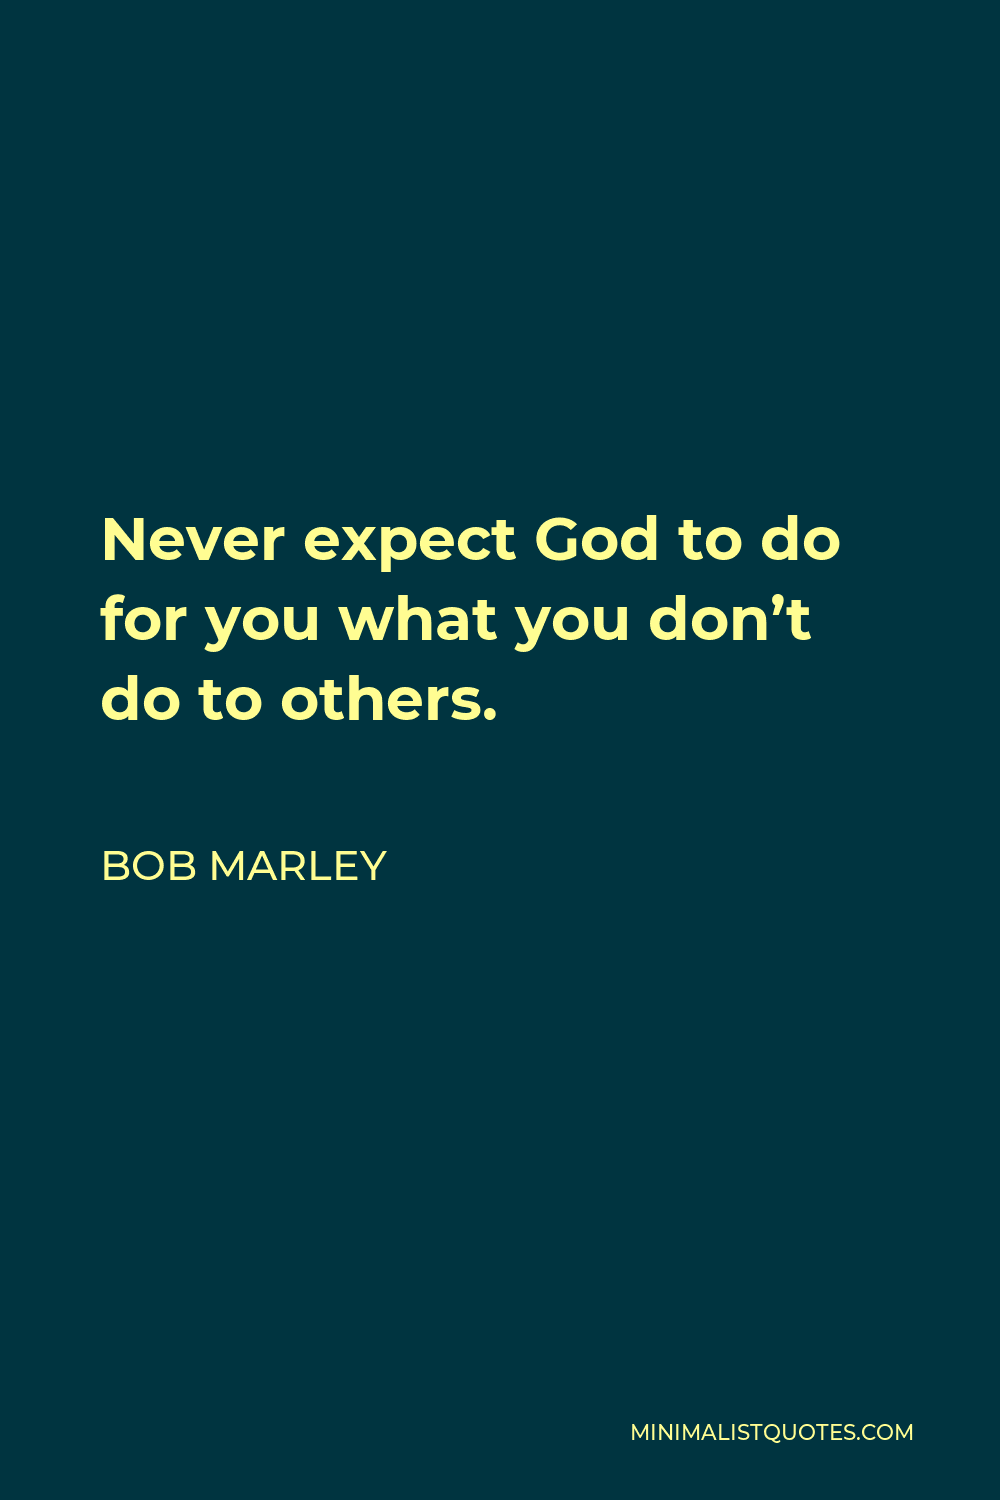 Bob Marley Quote - Never expect God to do for you what you don’t do to others.